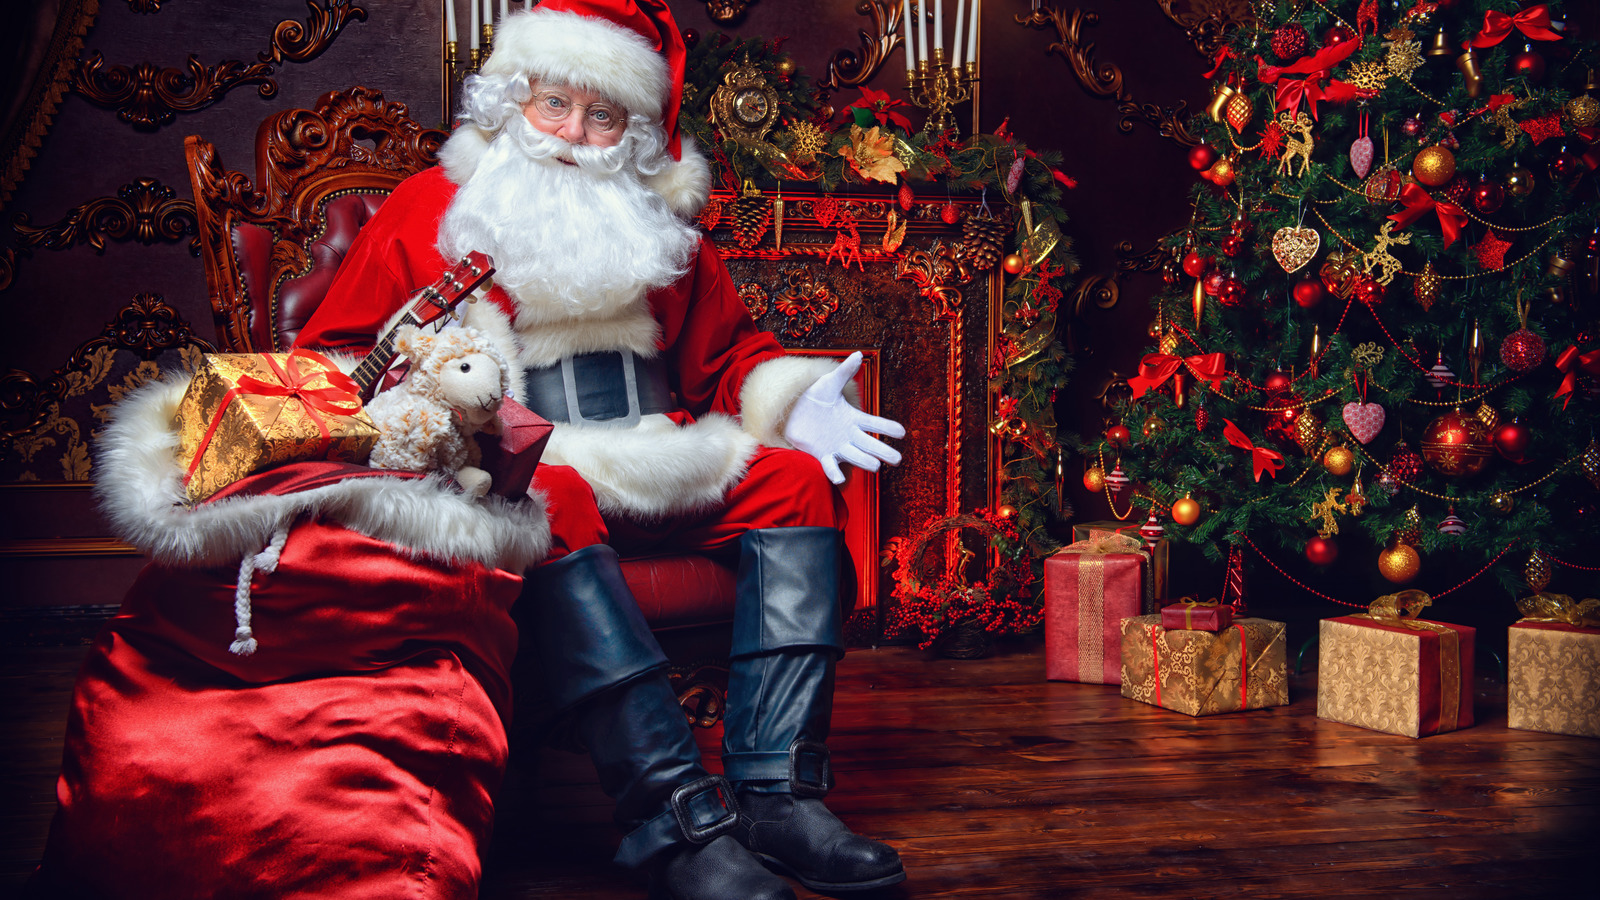 Incredible Compilation of Over 999 Genuine Santa Claus Images in ...